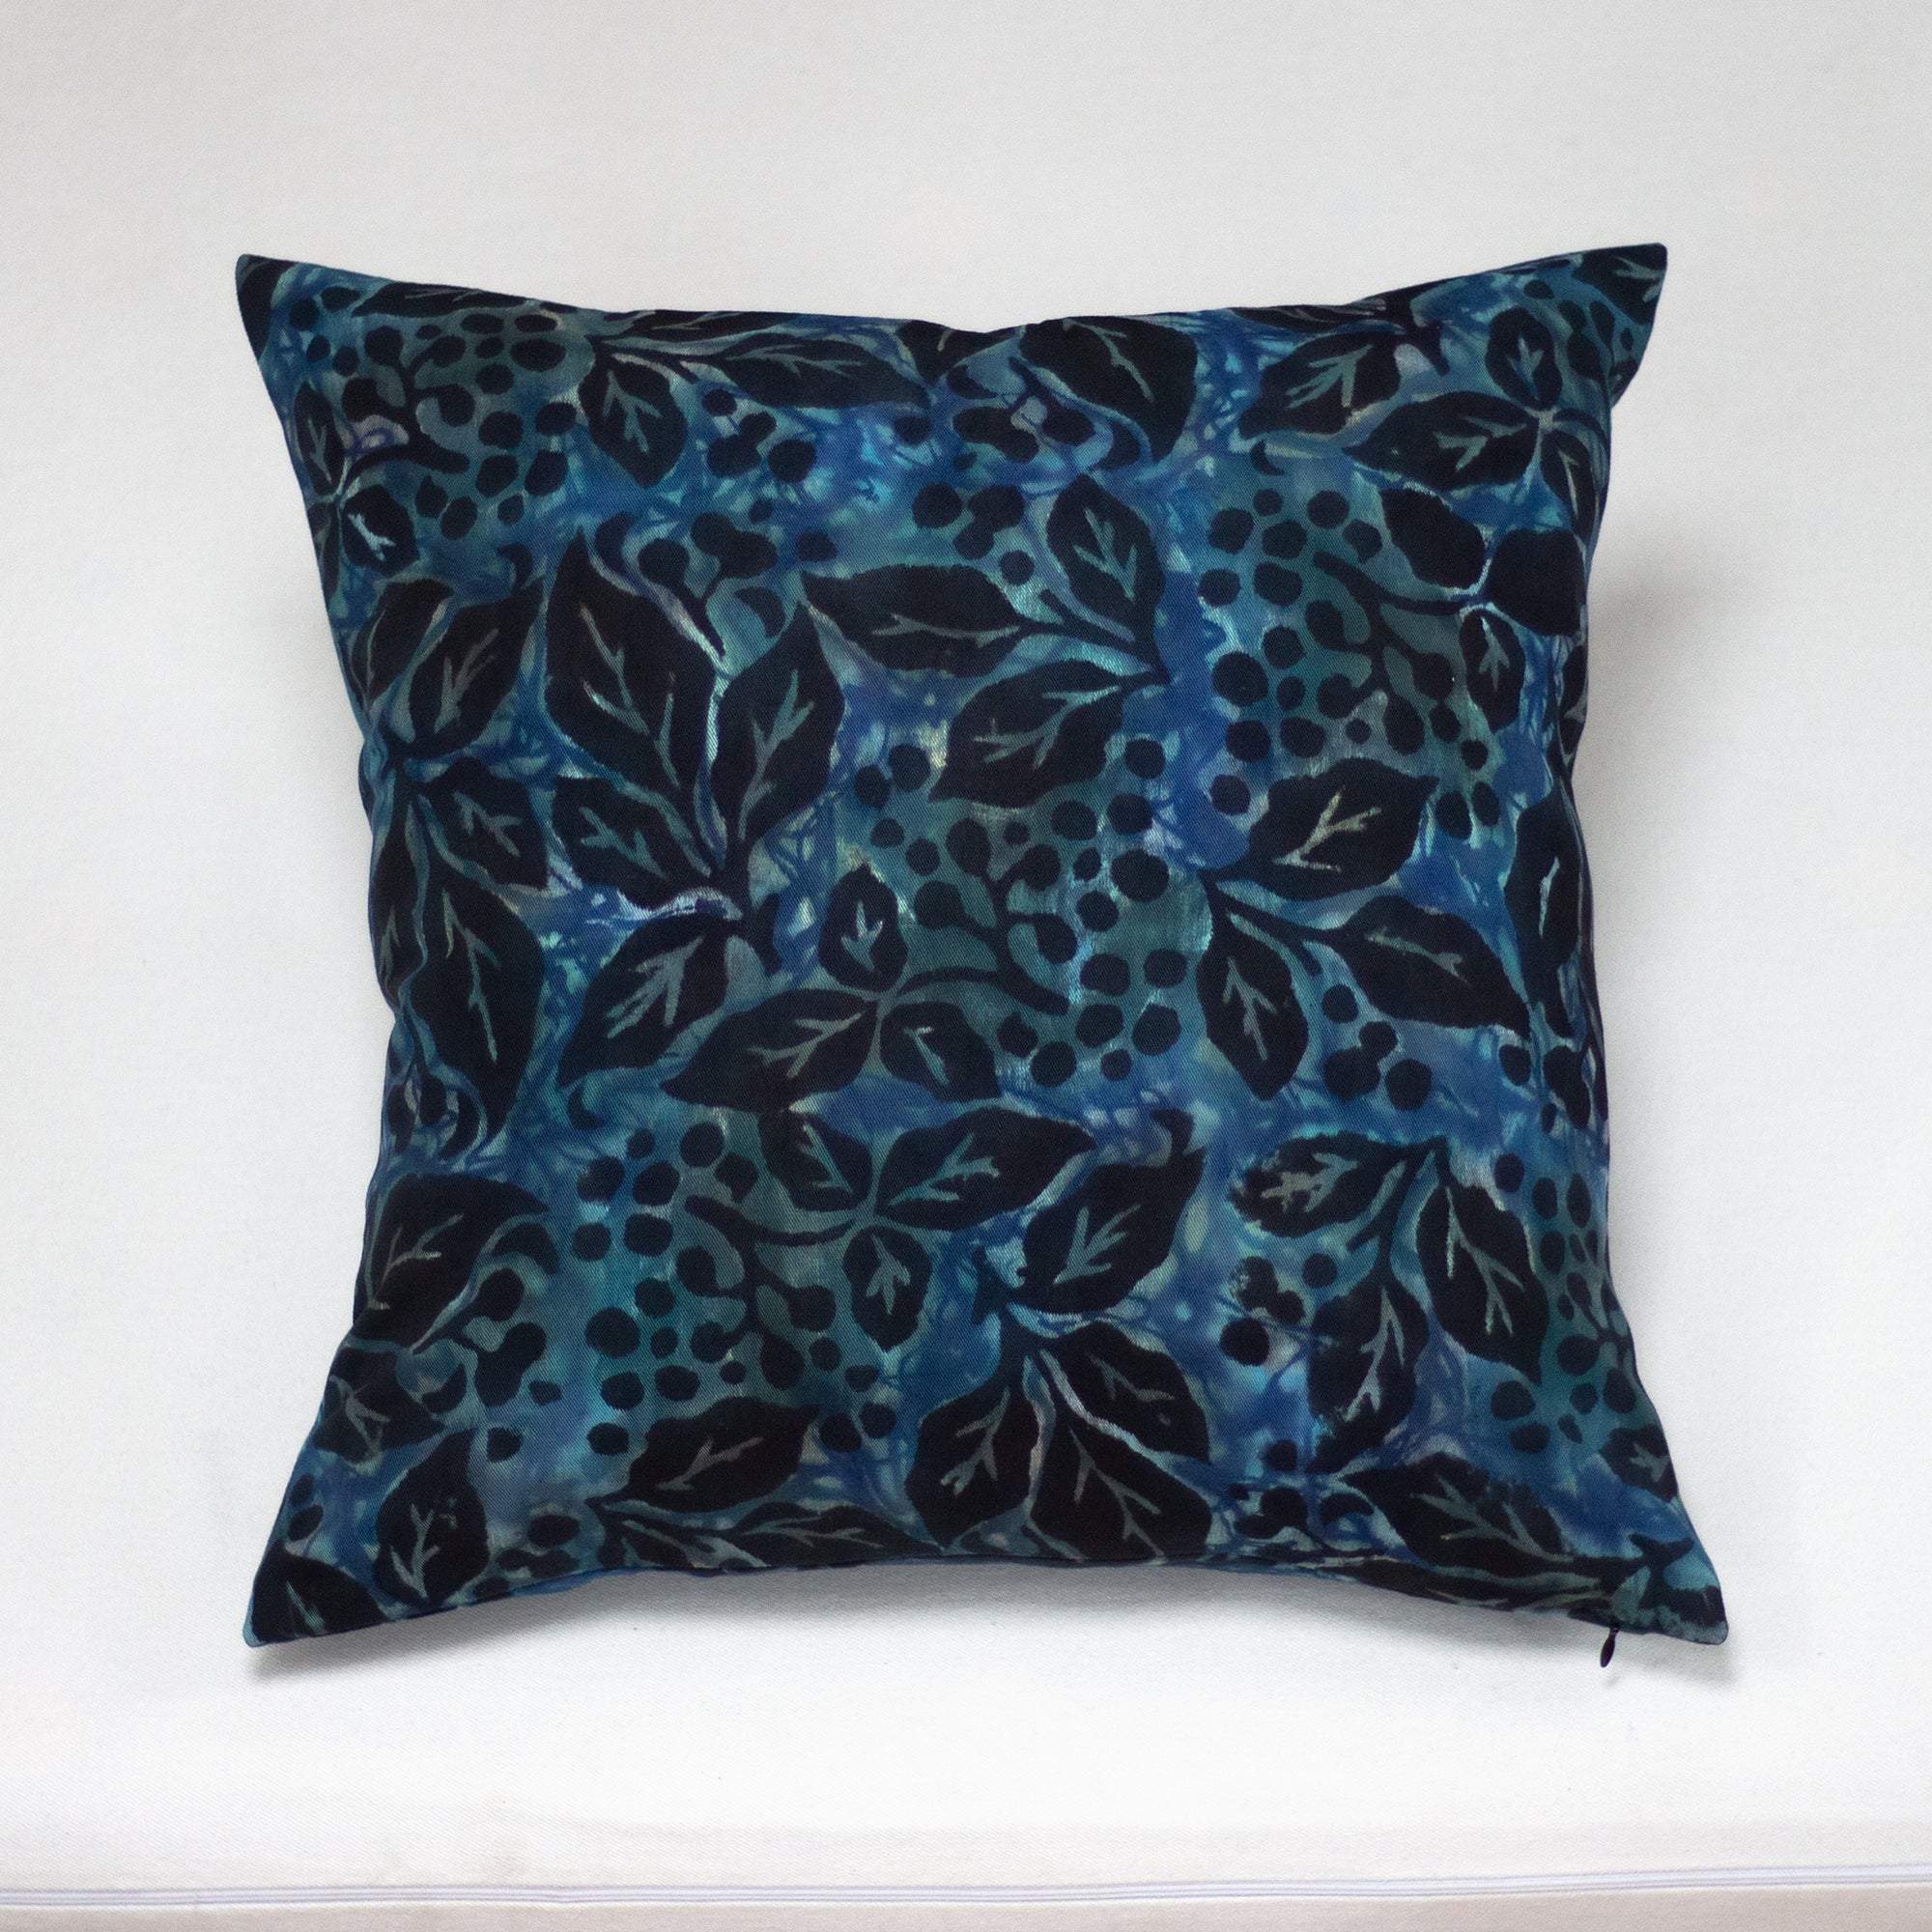 Hand Painted Accent Pillow Cover - Night Shade